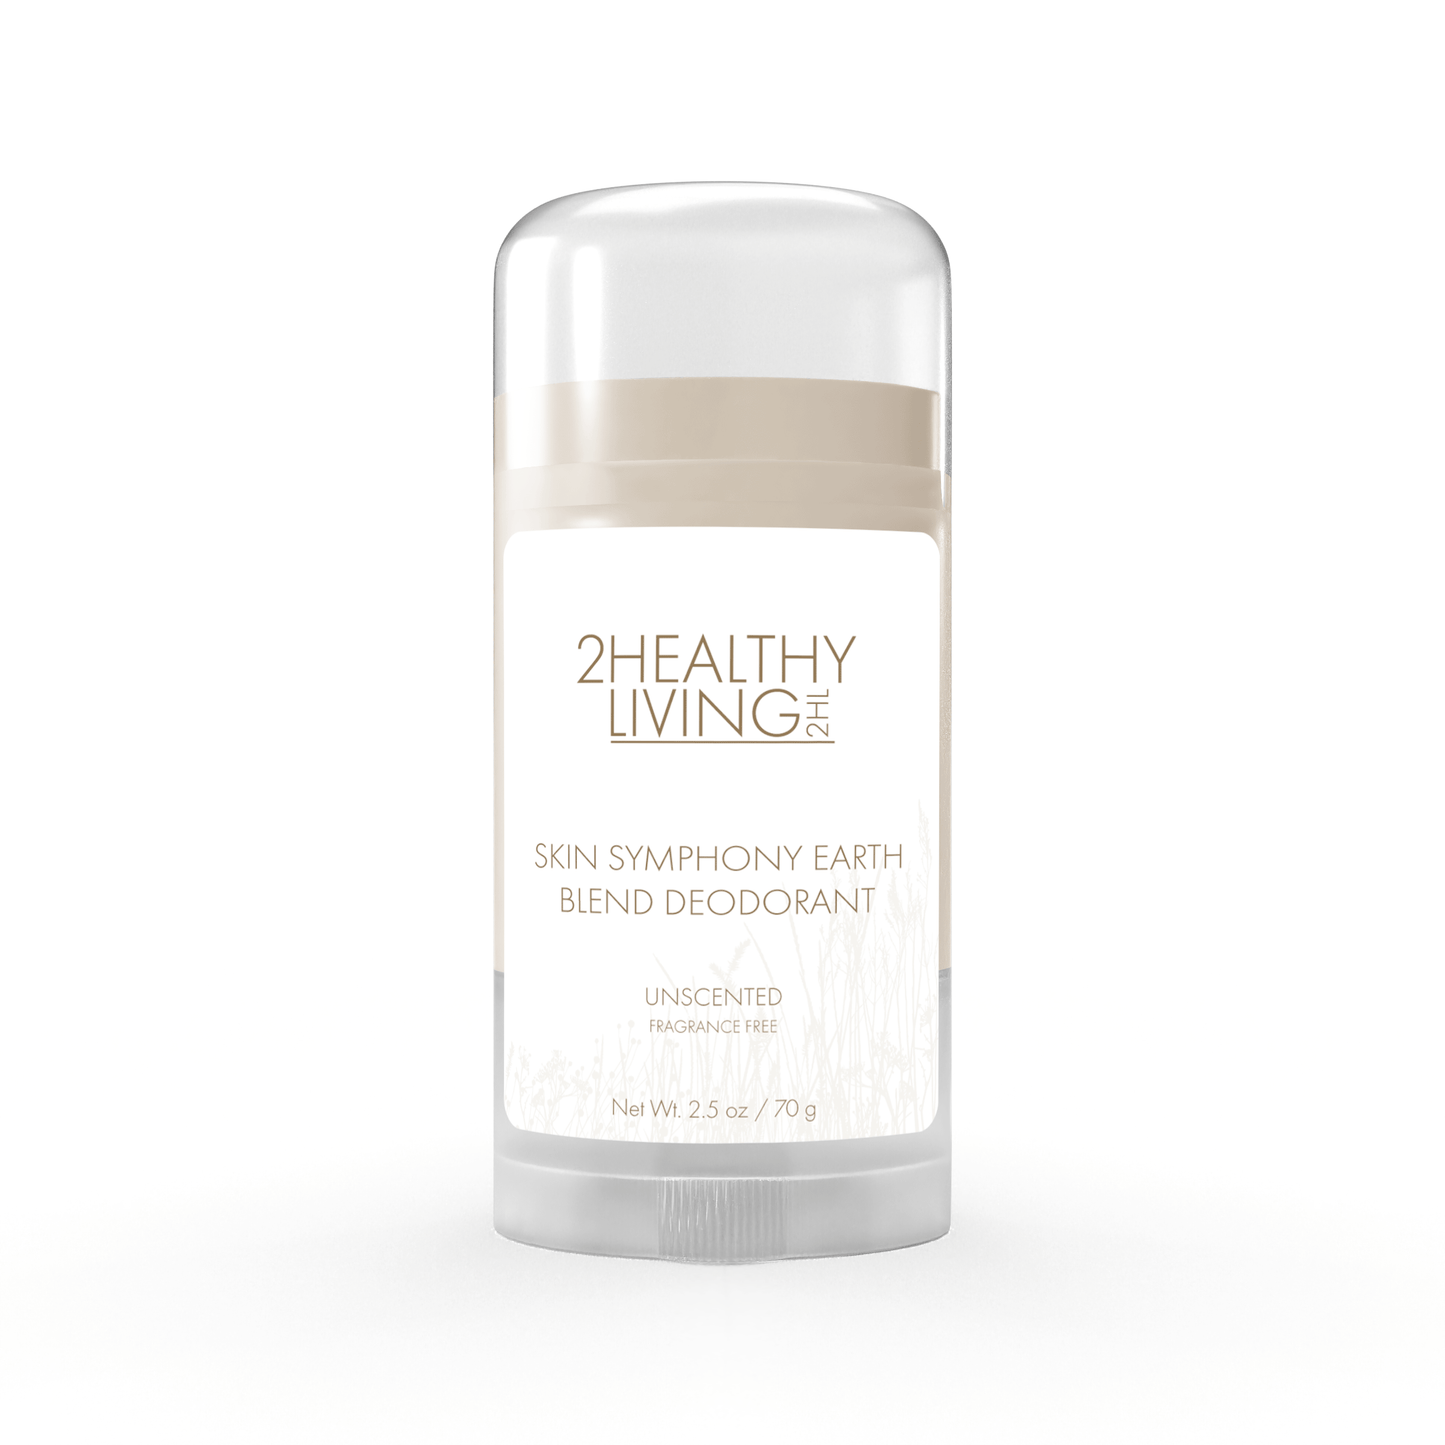 Unscented Skin Symphony Earth Blend Deodorant